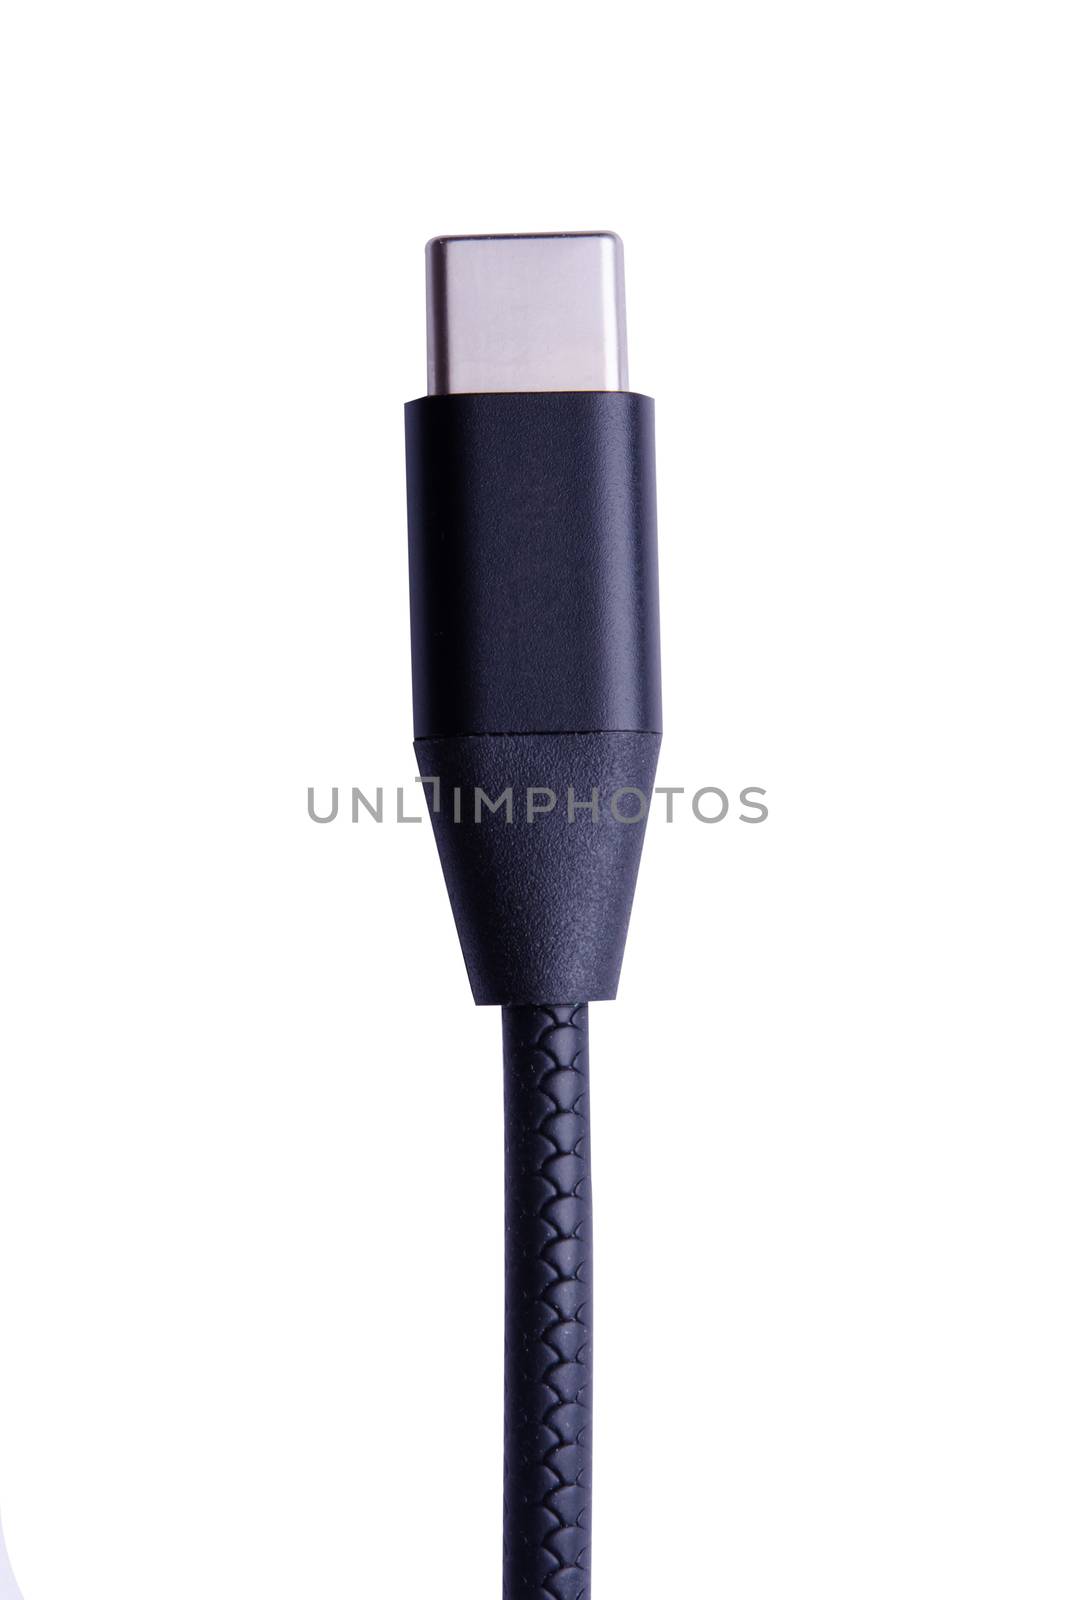 USB Type C, USB-C isolated on white background with clipping pat by sunnygb5